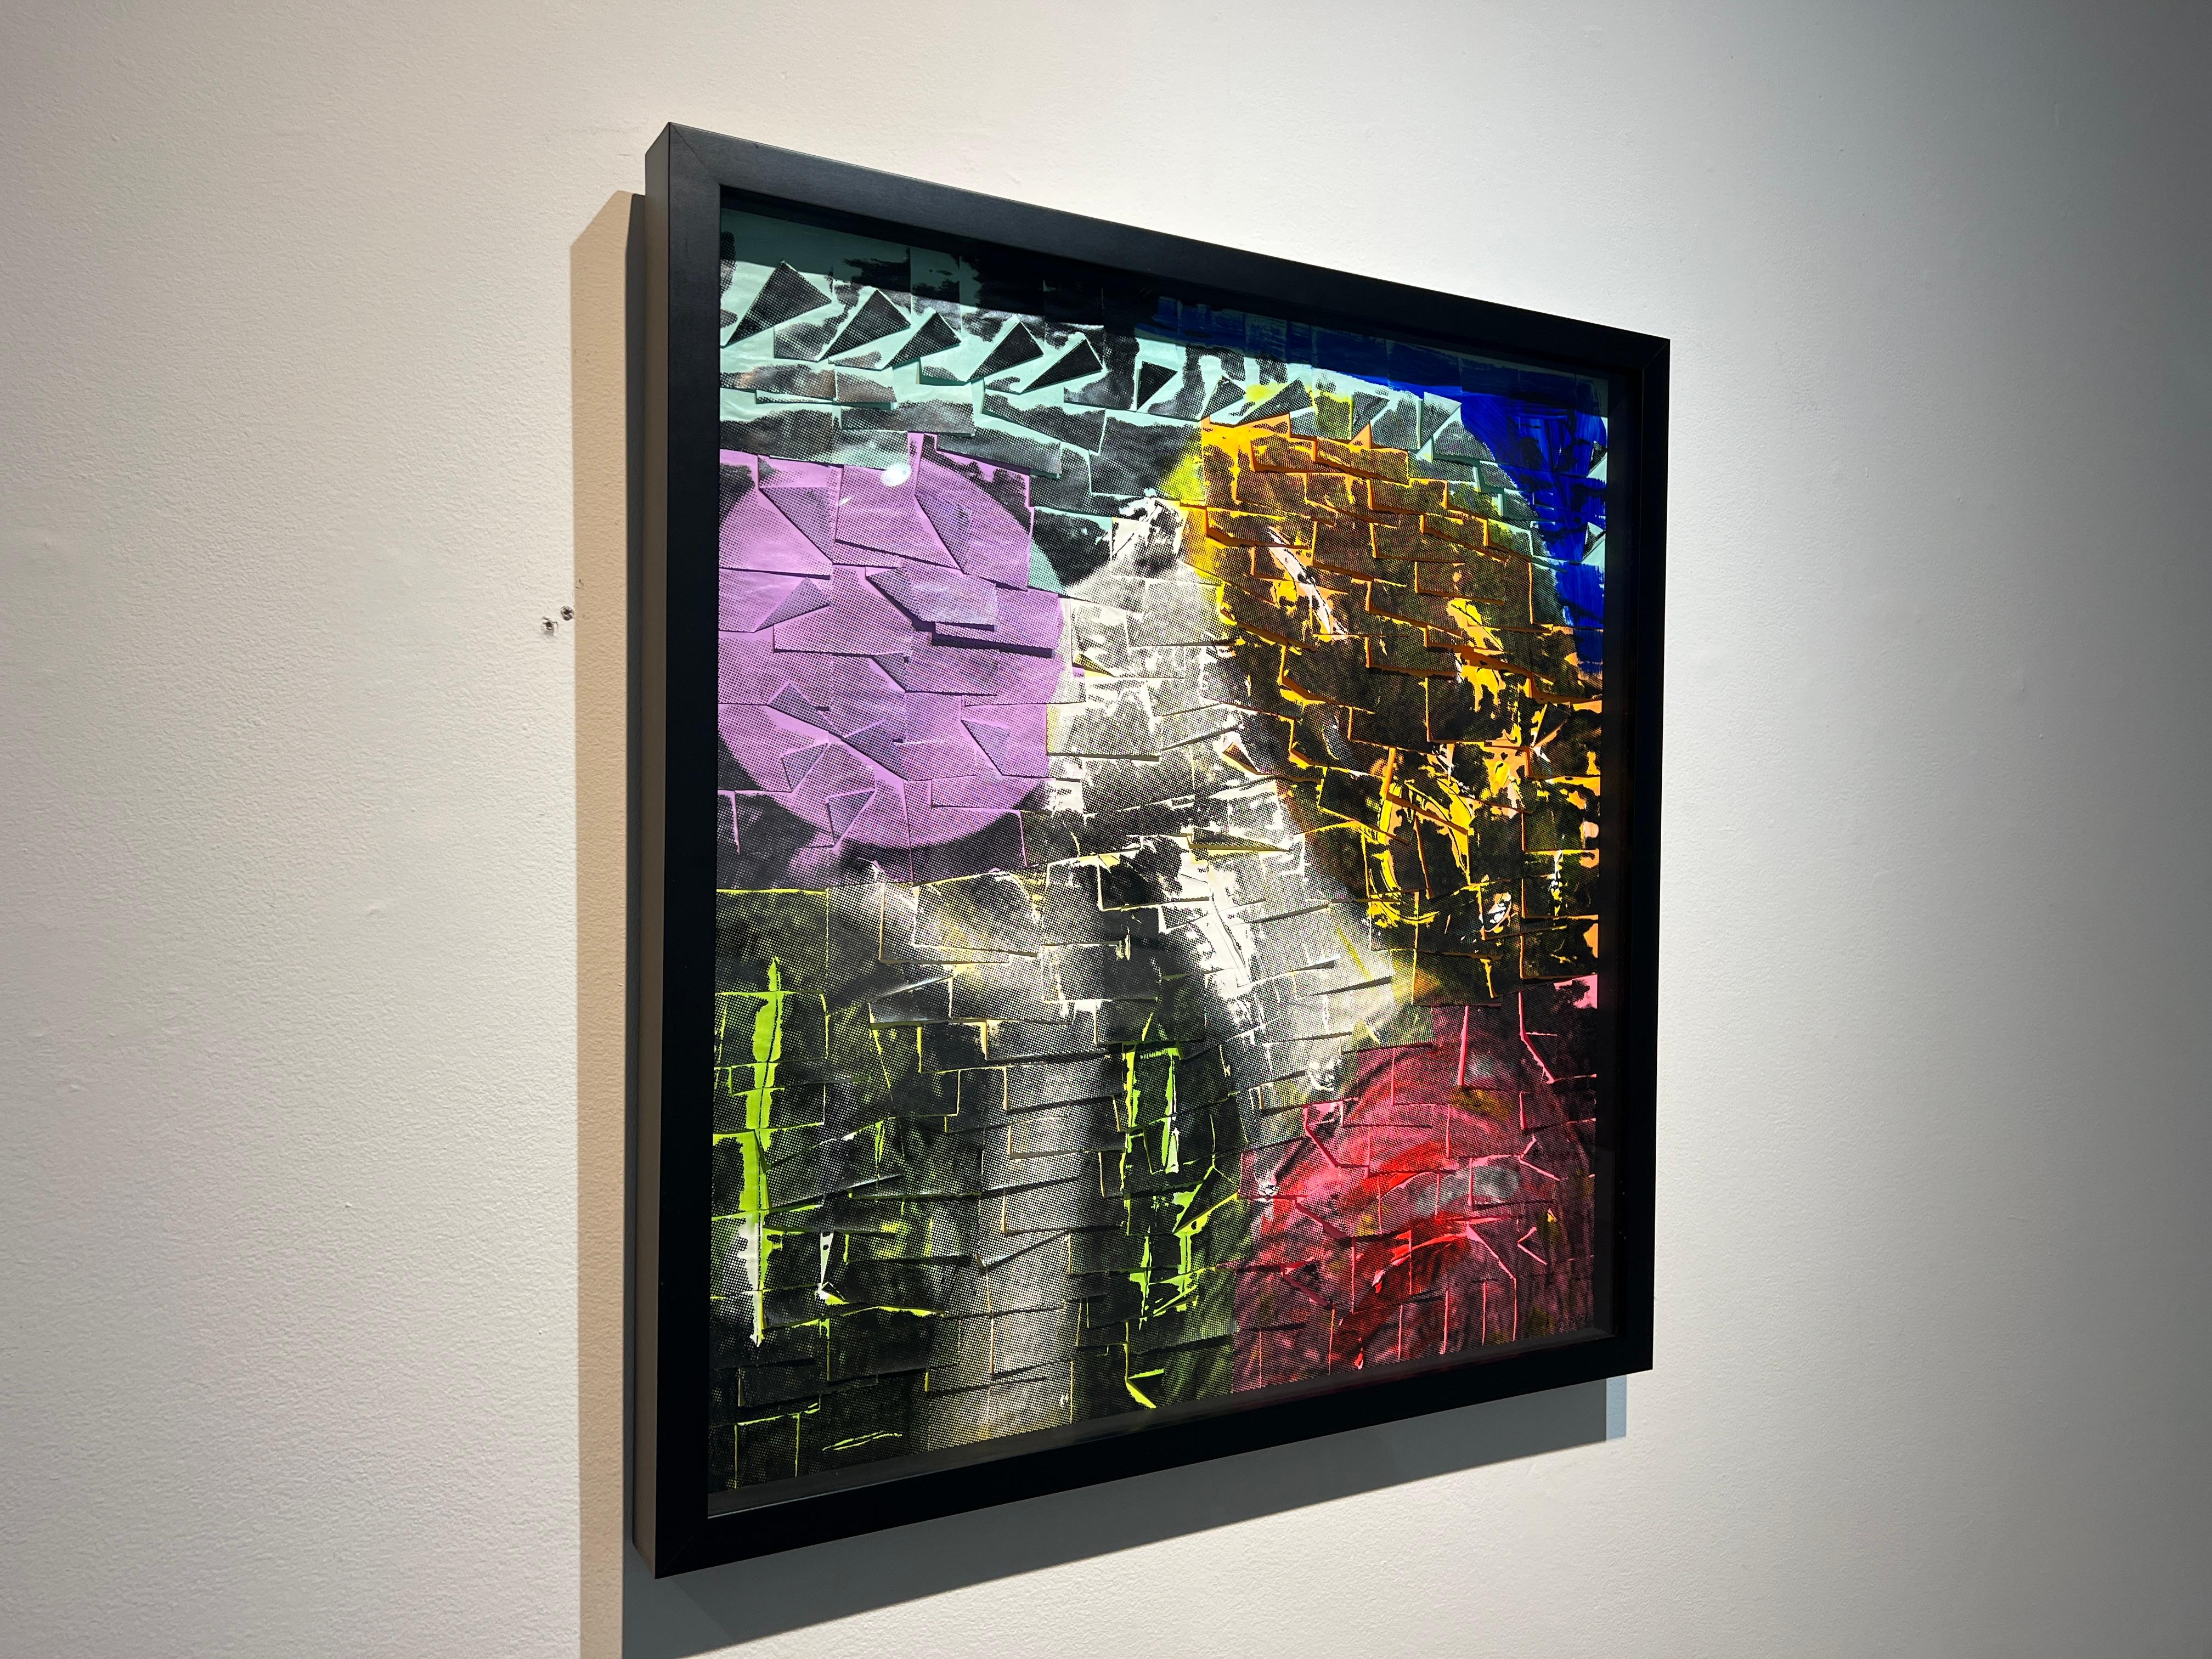 With the distinctive medium of post-it notes, Özmenoğlu re-contextualizes everyday objects from something ordinary to a beautiful work of art. The individualized behavior of each post-it note results in a unique mosaic-like effect with some pieces